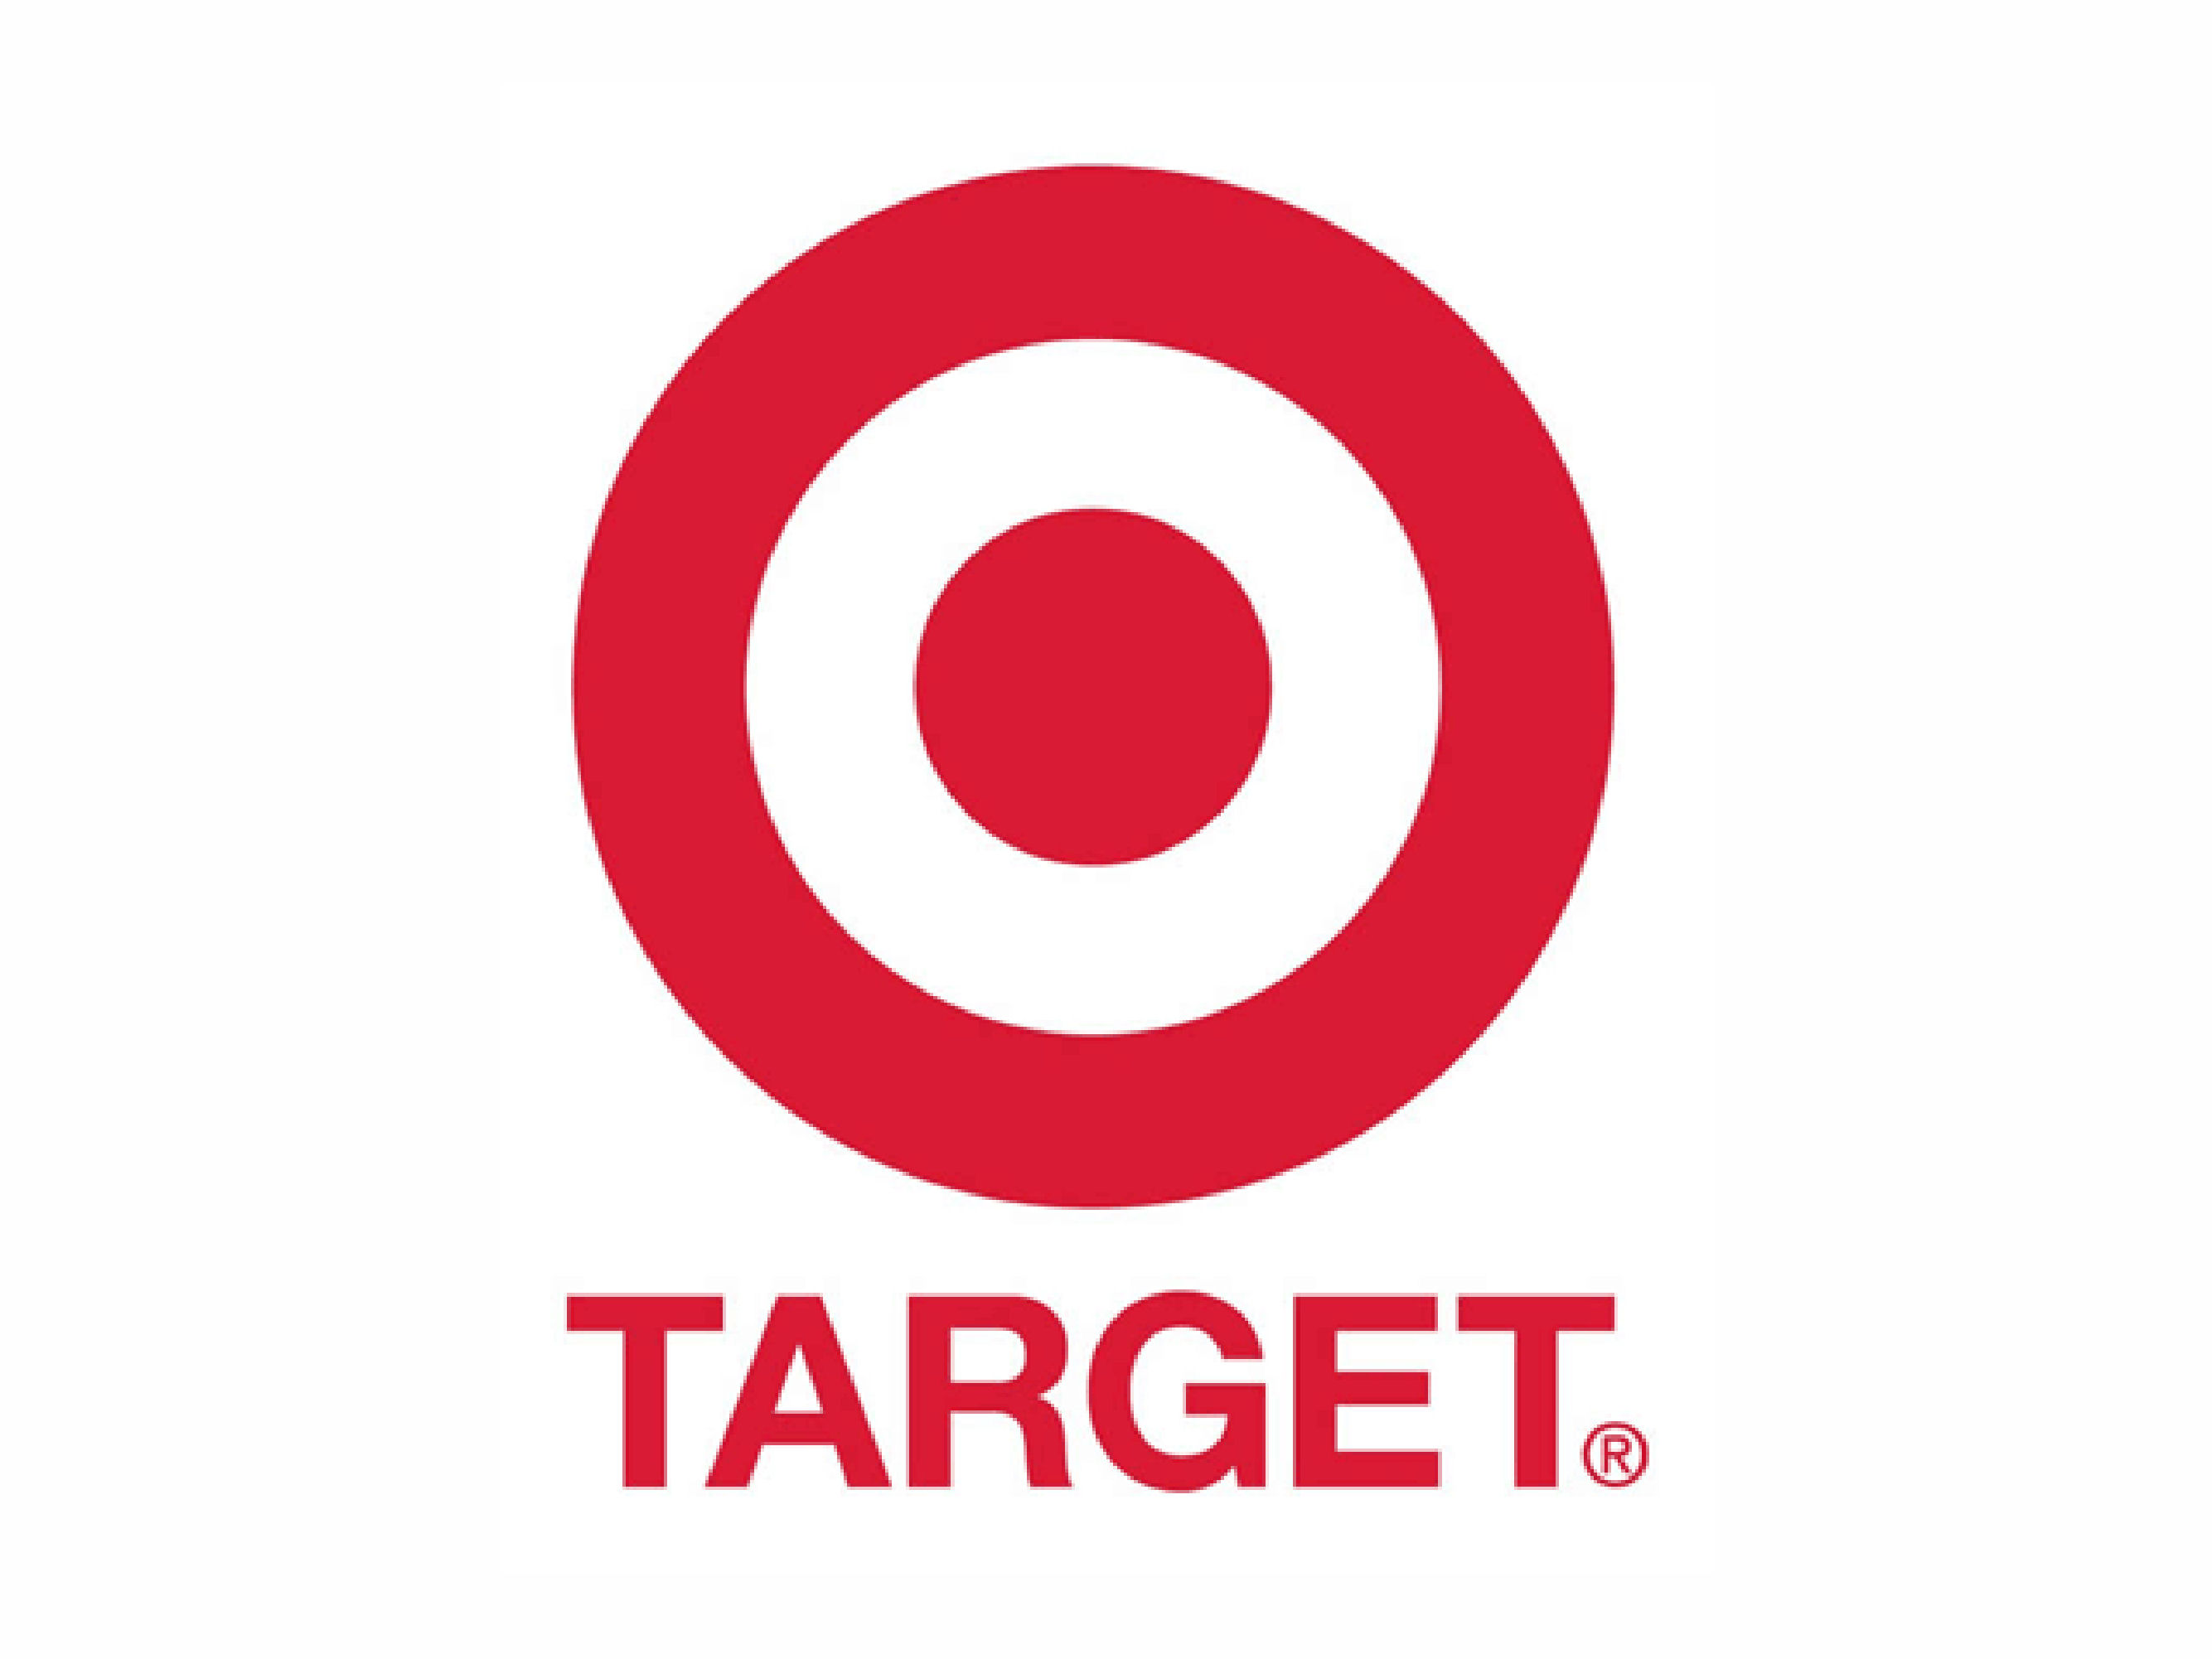 target store clipart - photo #25